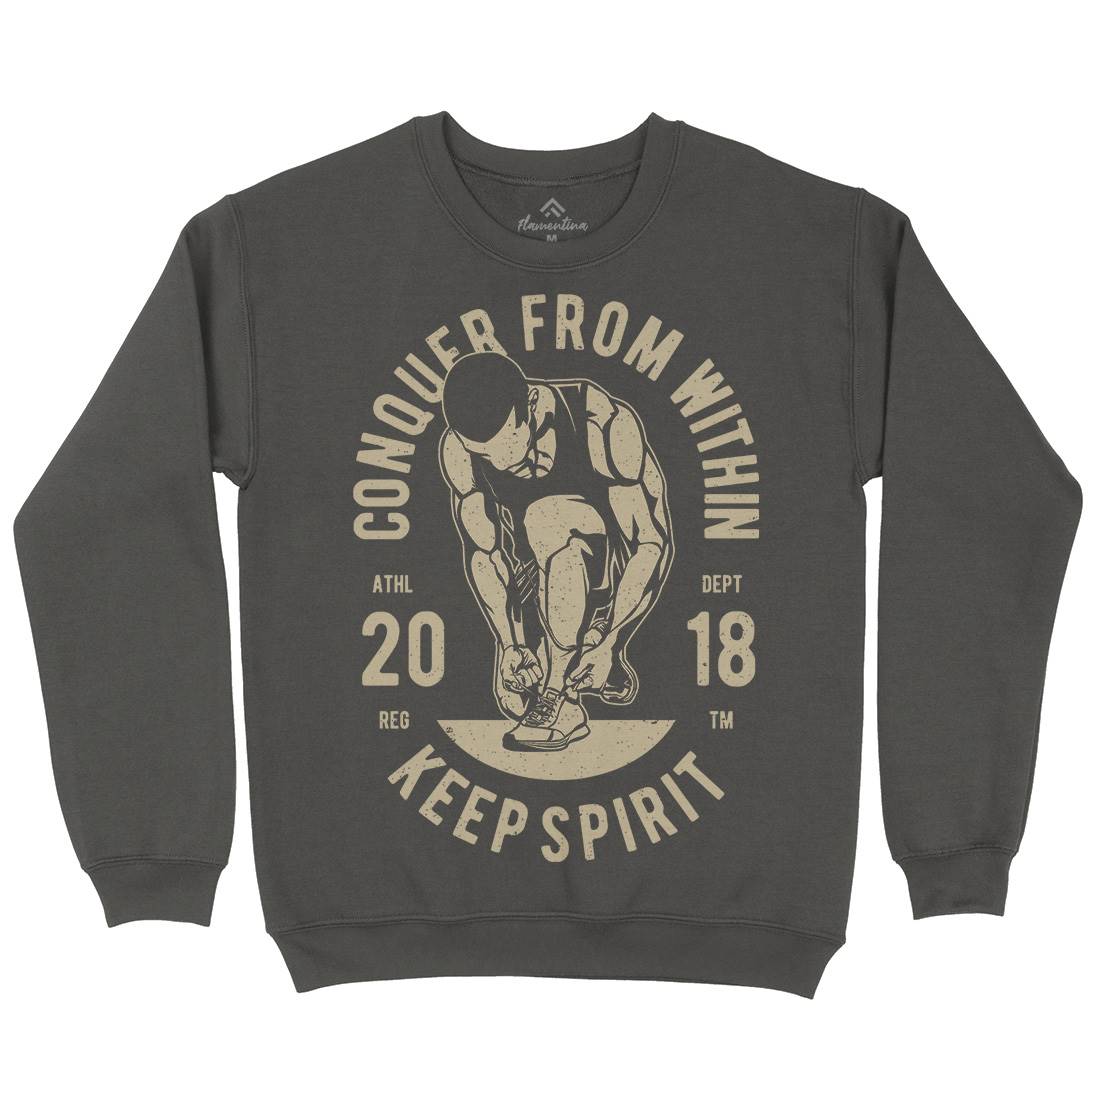 Conquer From Within Mens Crew Neck Sweatshirt Sport A638